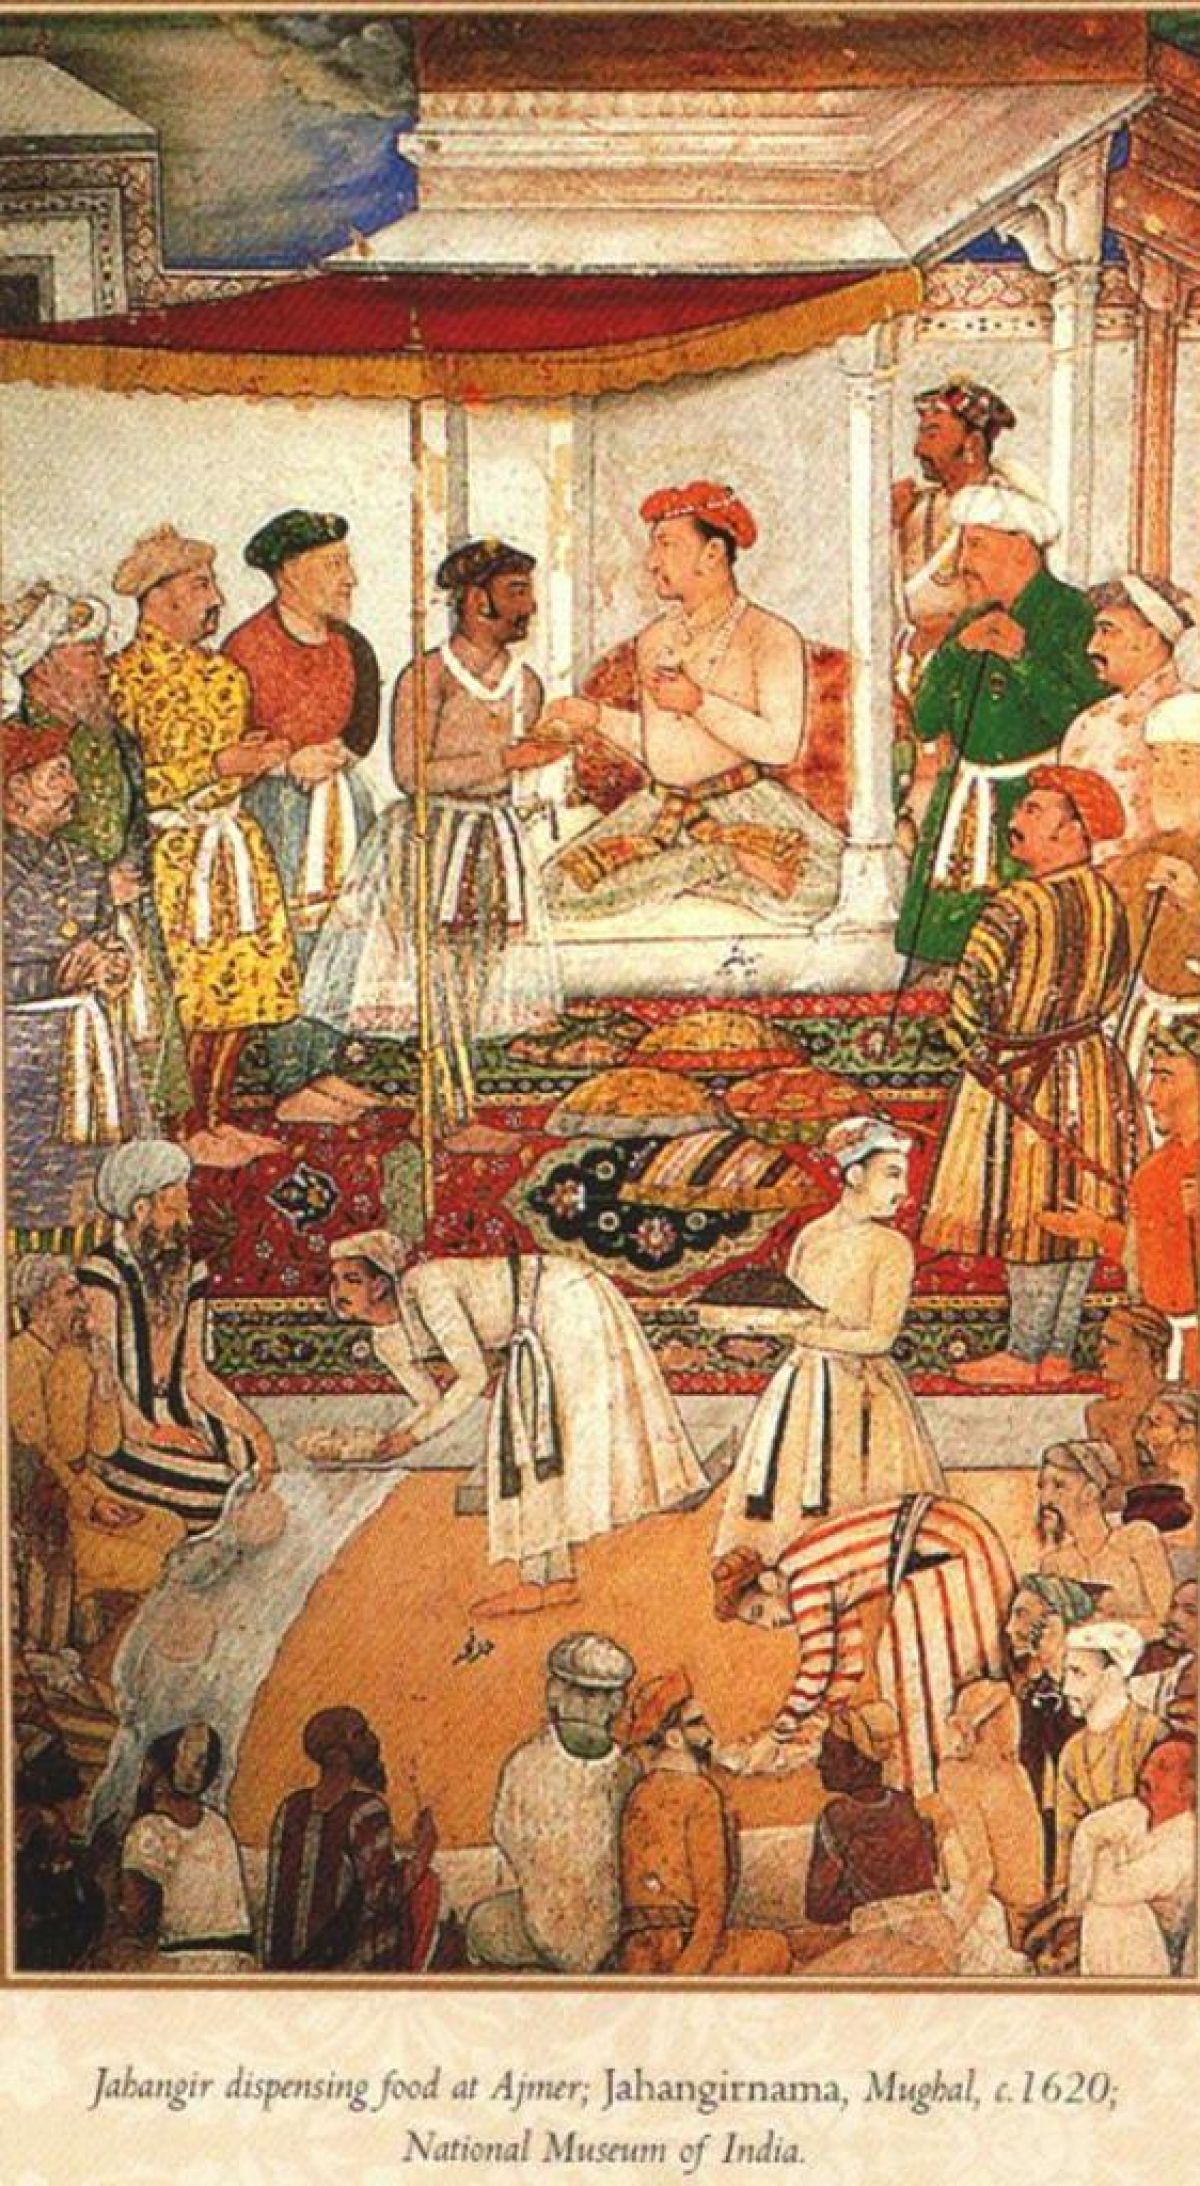 Restaurants and Indian Mythology: How it all started